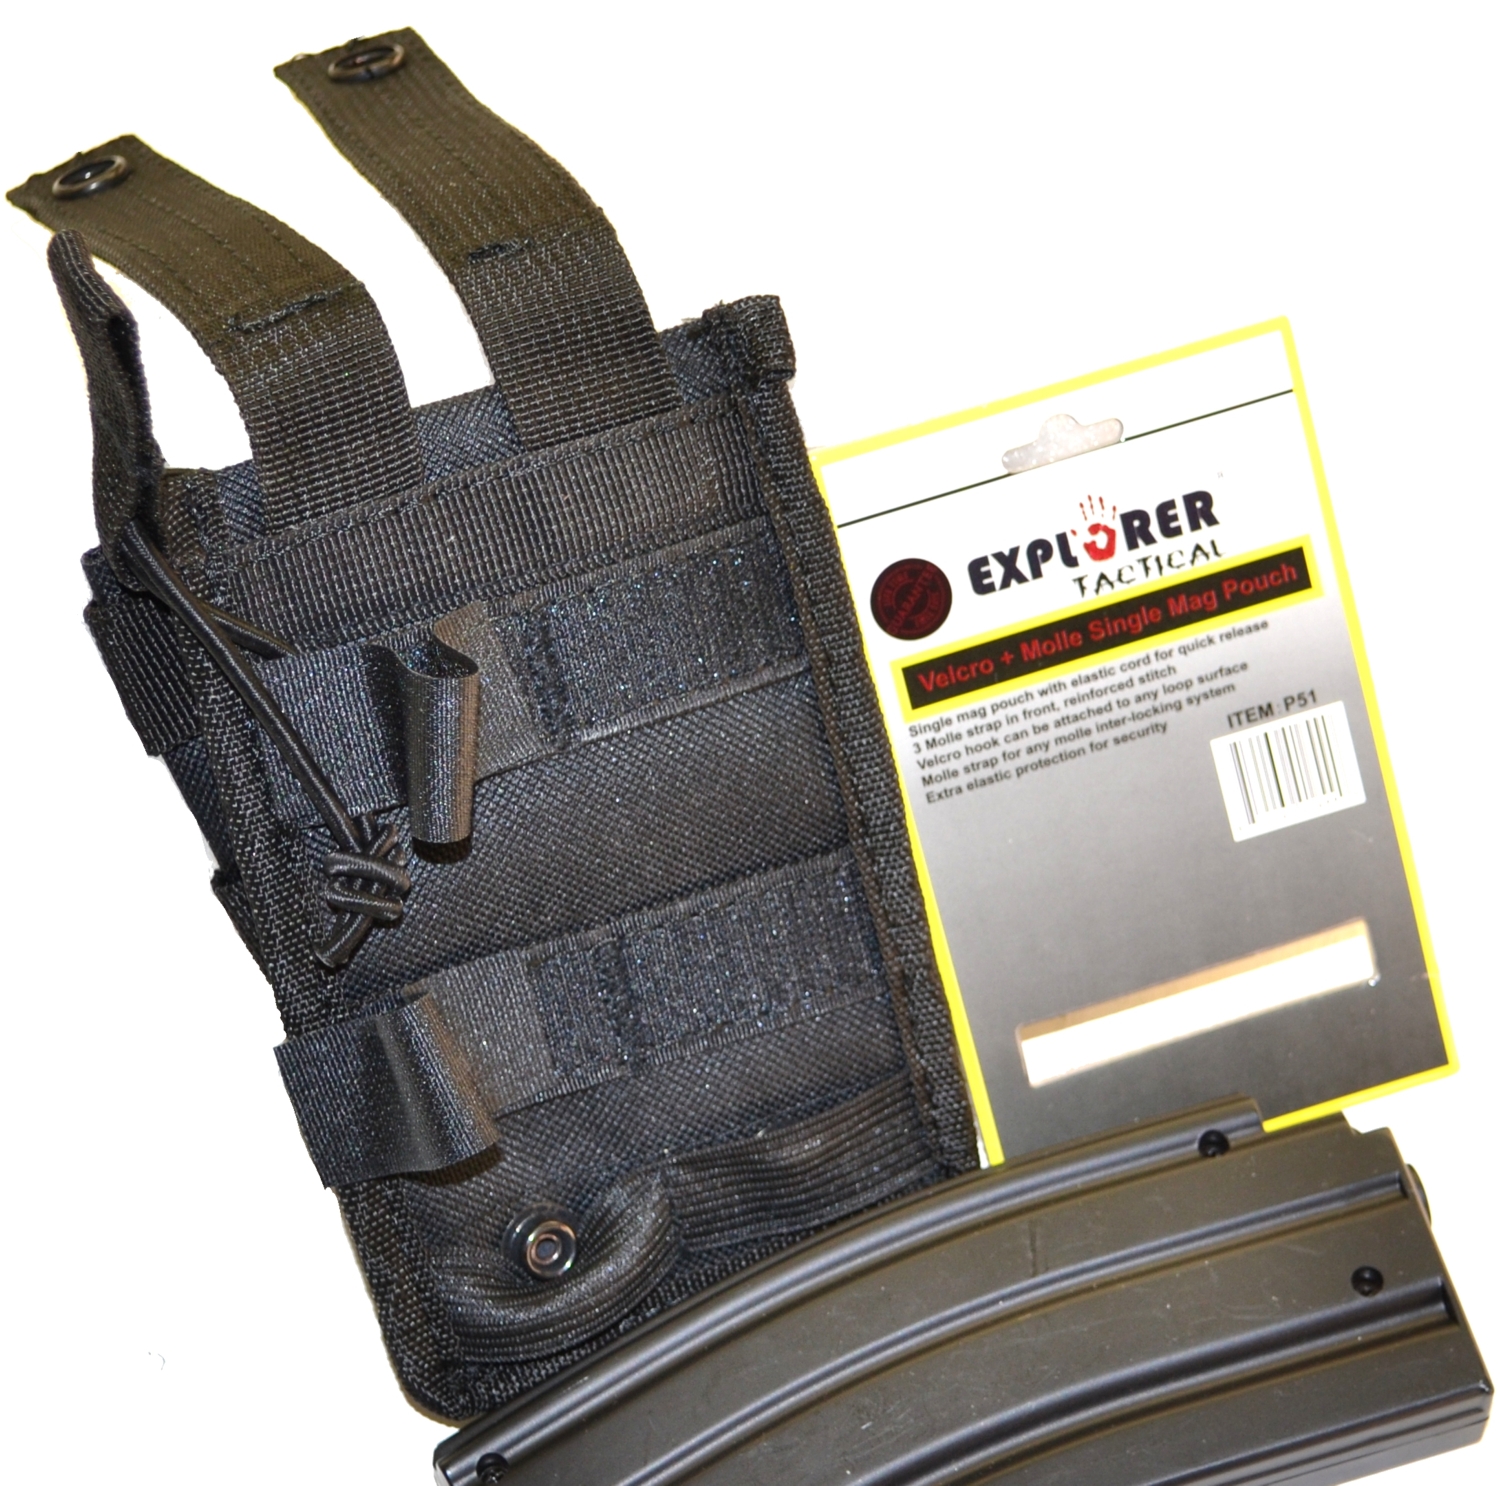 P11, P53 Single Mag Pouch elcro mag holder with finger tab for easy access M.O.L.L.E straps Drain holes Extra Velcro at back for us inside your backpack or gun case Mag Pouches Leave a comment